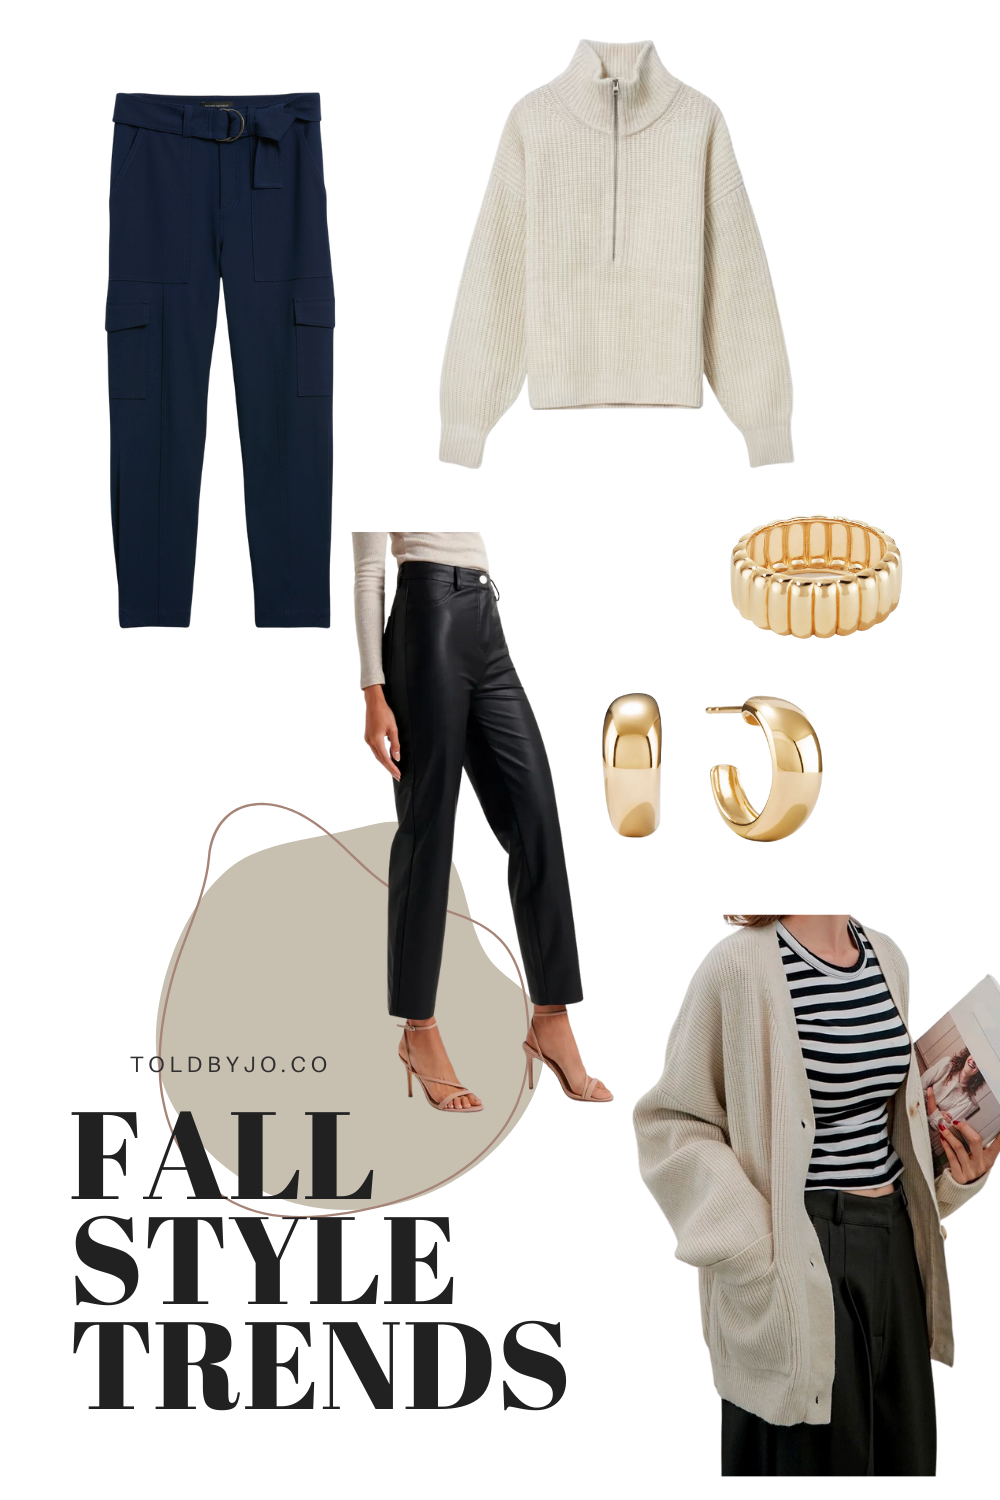 5 Fall Style Trends to Add to Your Cart Right Now (And How to Style Them)